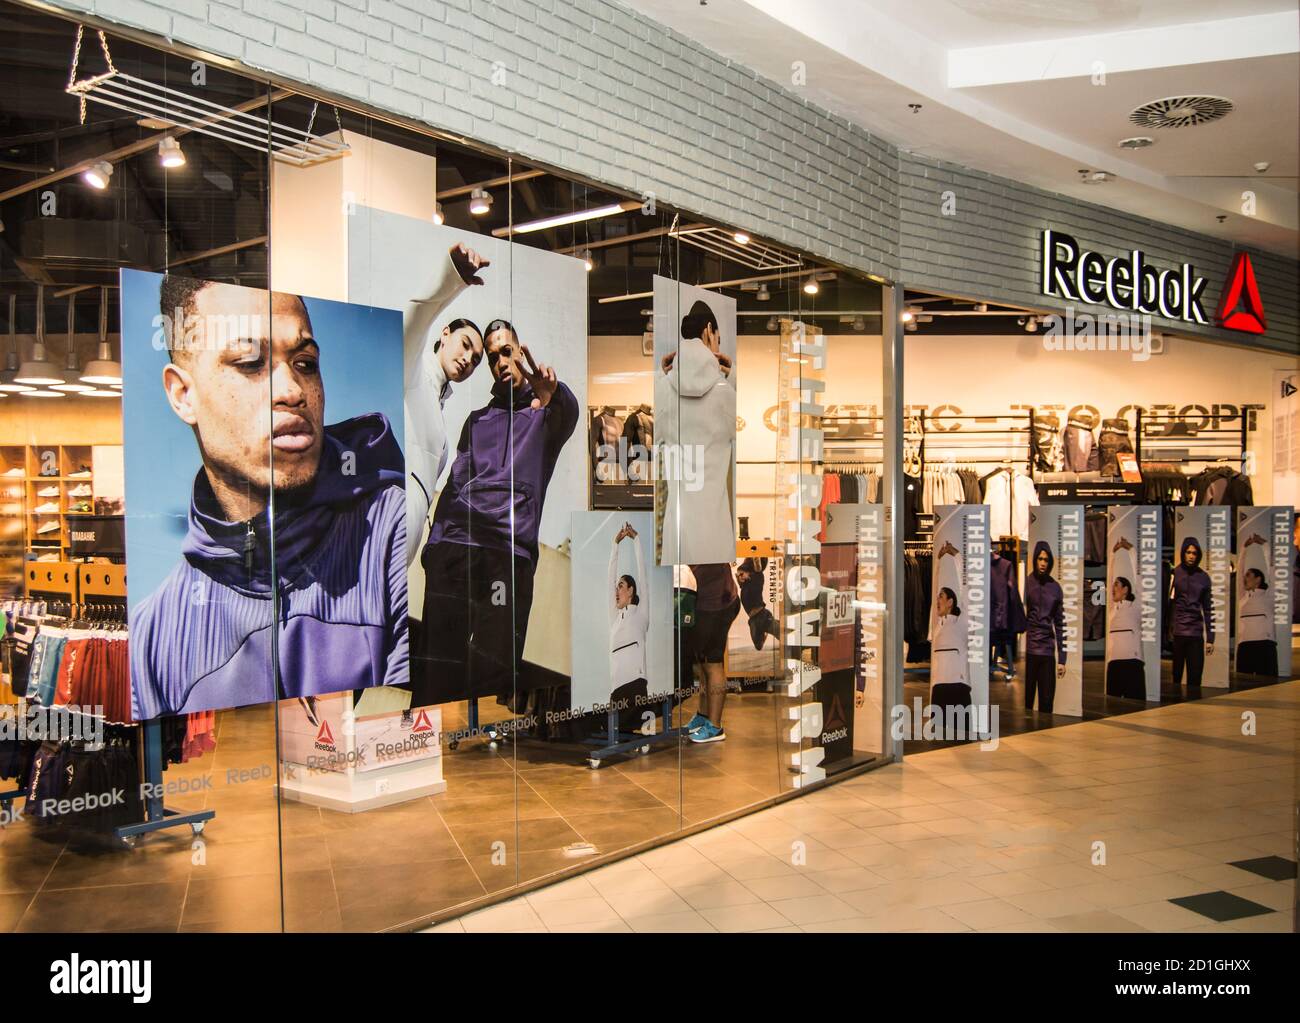 Moscow, Russia - October 8, 2019: Reebok brand store in the Europolis shopping in Moscow. Modern interior of a sportswear retail store Stock Photo - Alamy